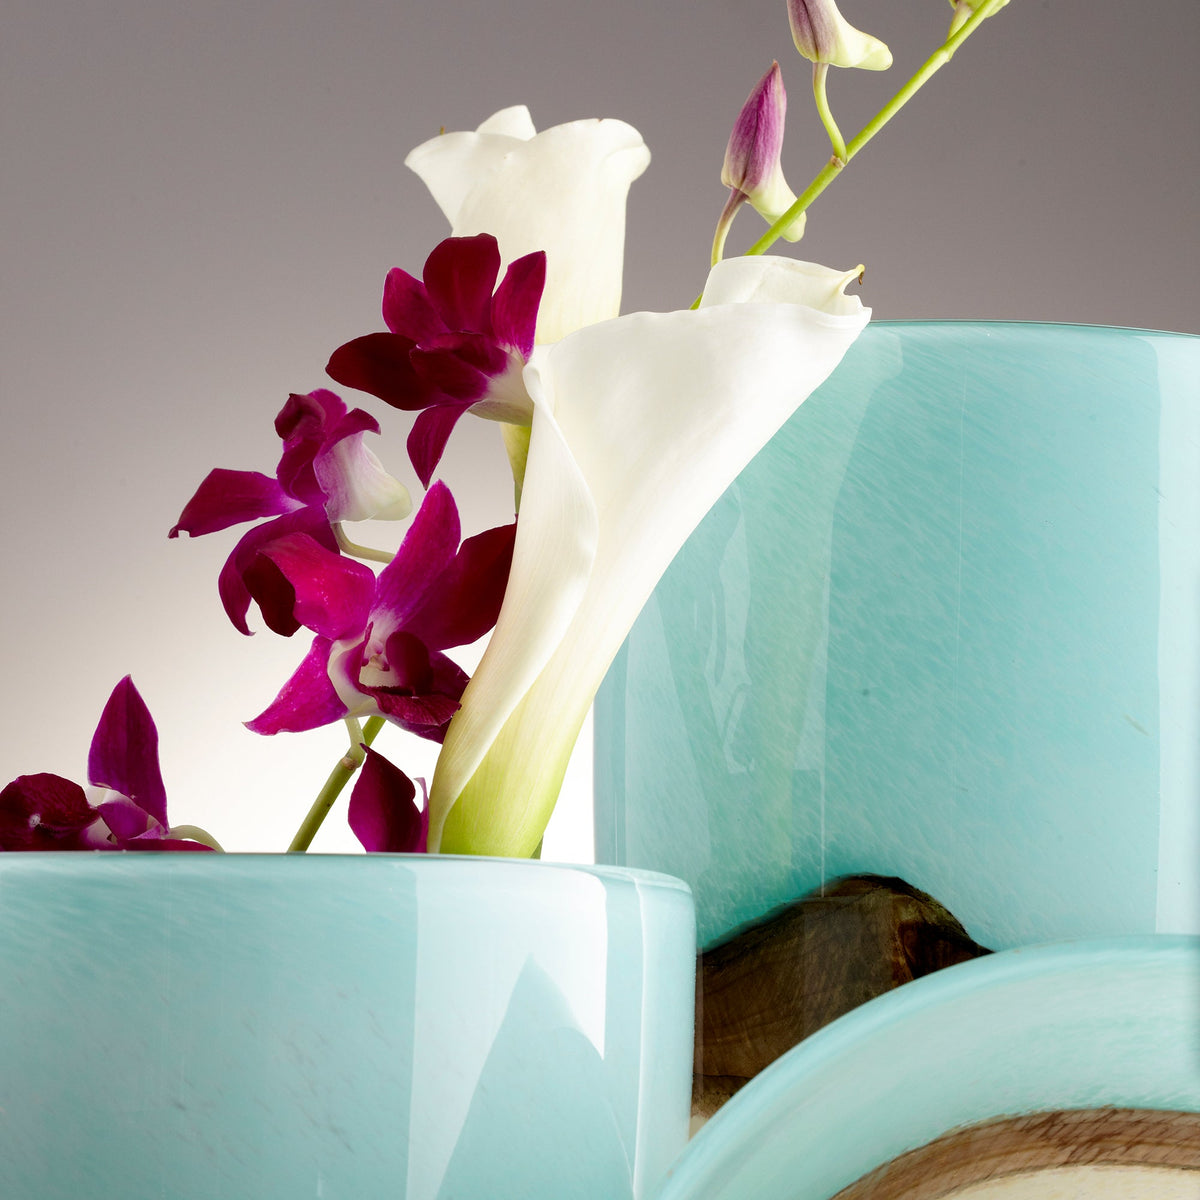 Earth Vase|Turquoise-MD by Cyan